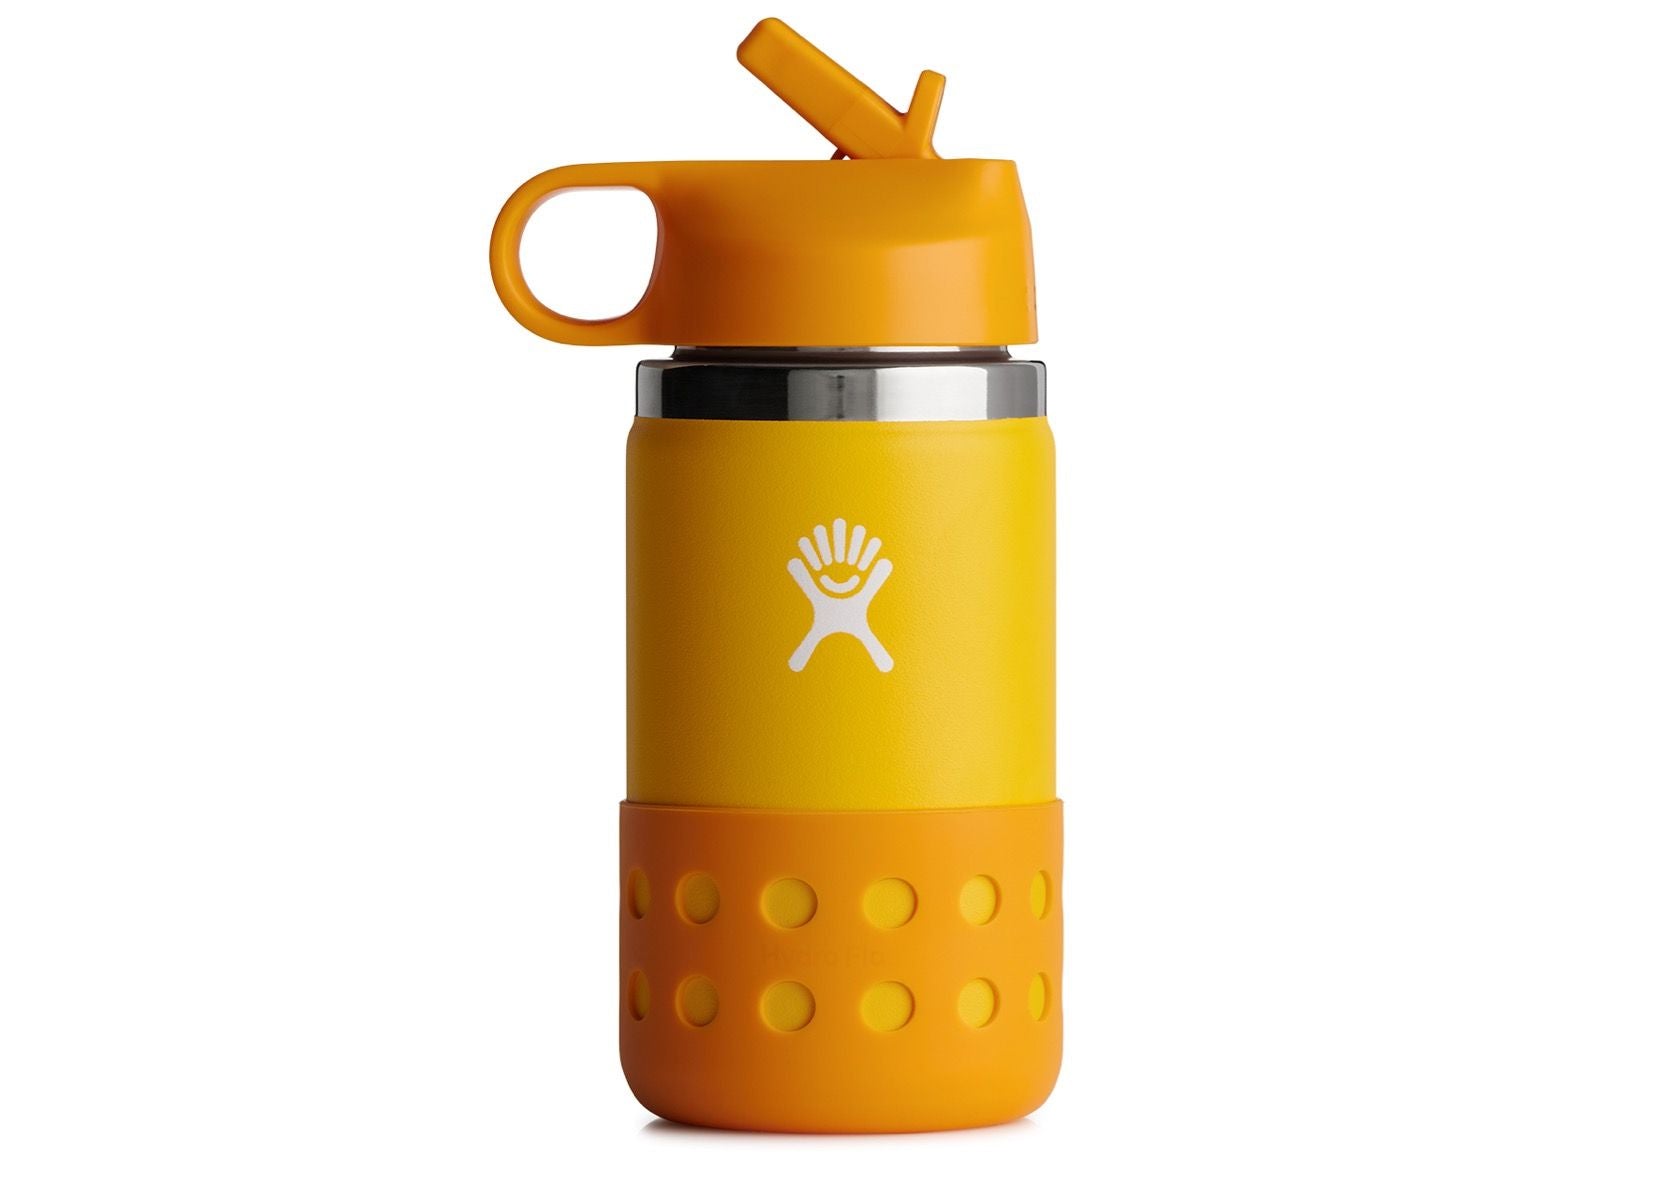 Hydro Flask Kids' 12 oz. Wide Mouth Bottle - Canary $ 29.95